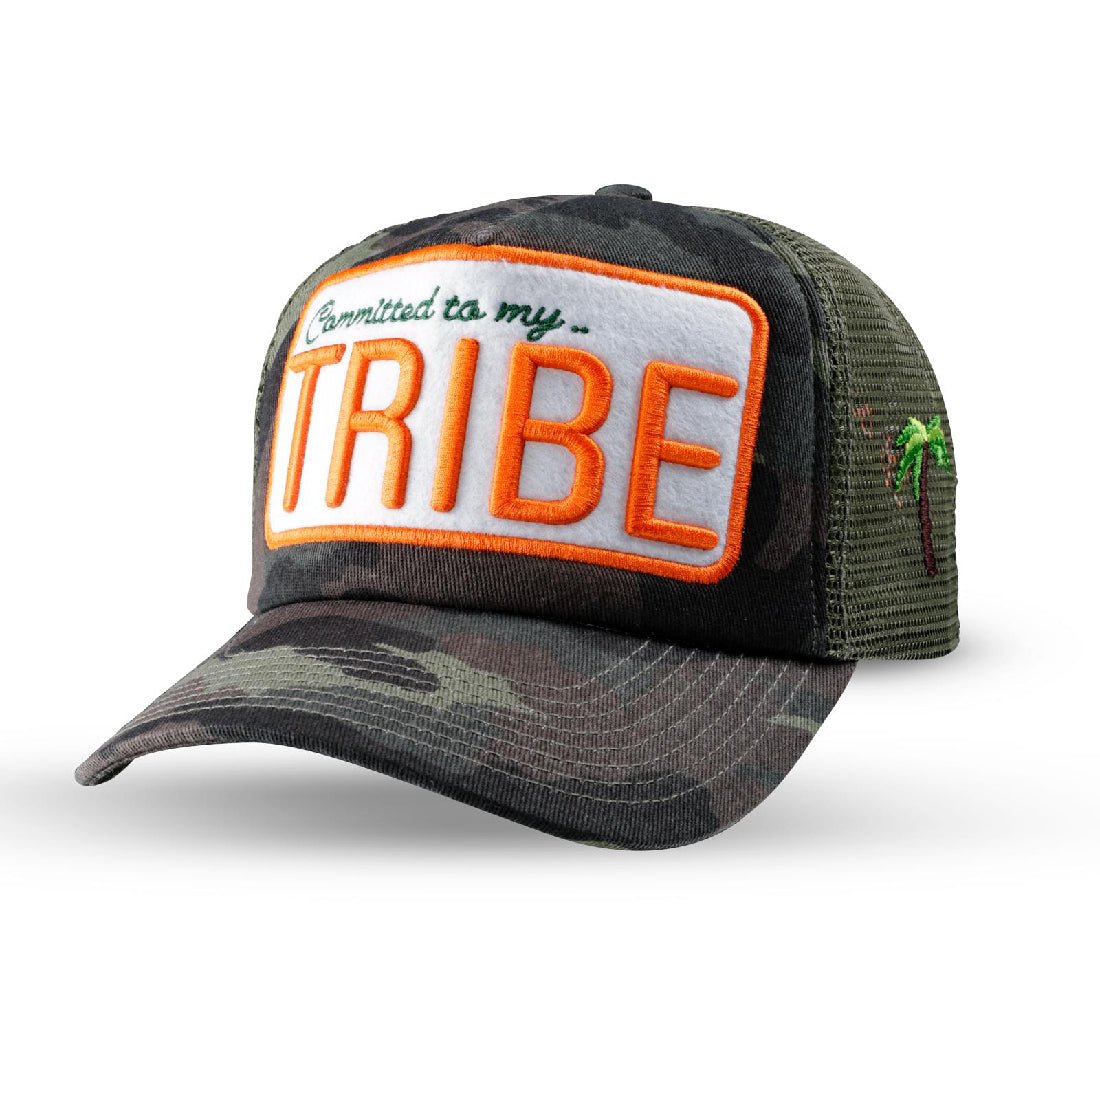 Tribe Camo Adults Cap - Green/Brown/Beige - قبعة - Store 974 | ستور ٩٧٤